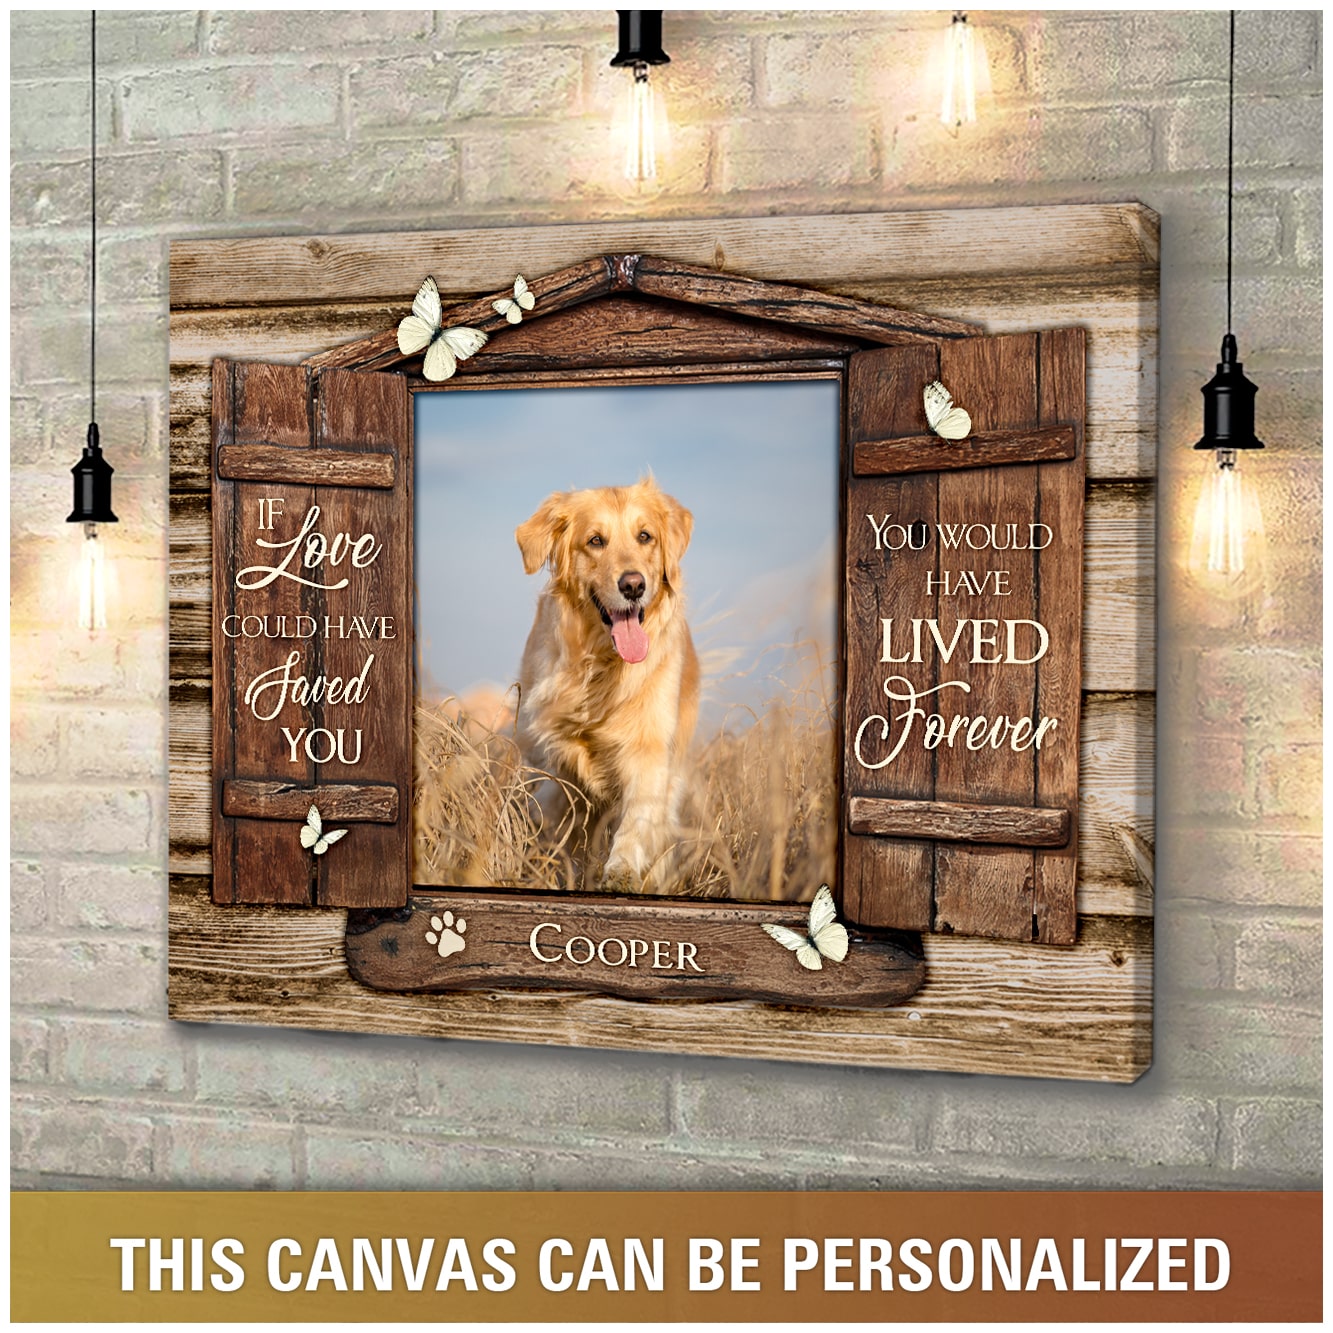 Personalized Pet If love could have faved you you would have lived forever canvas2